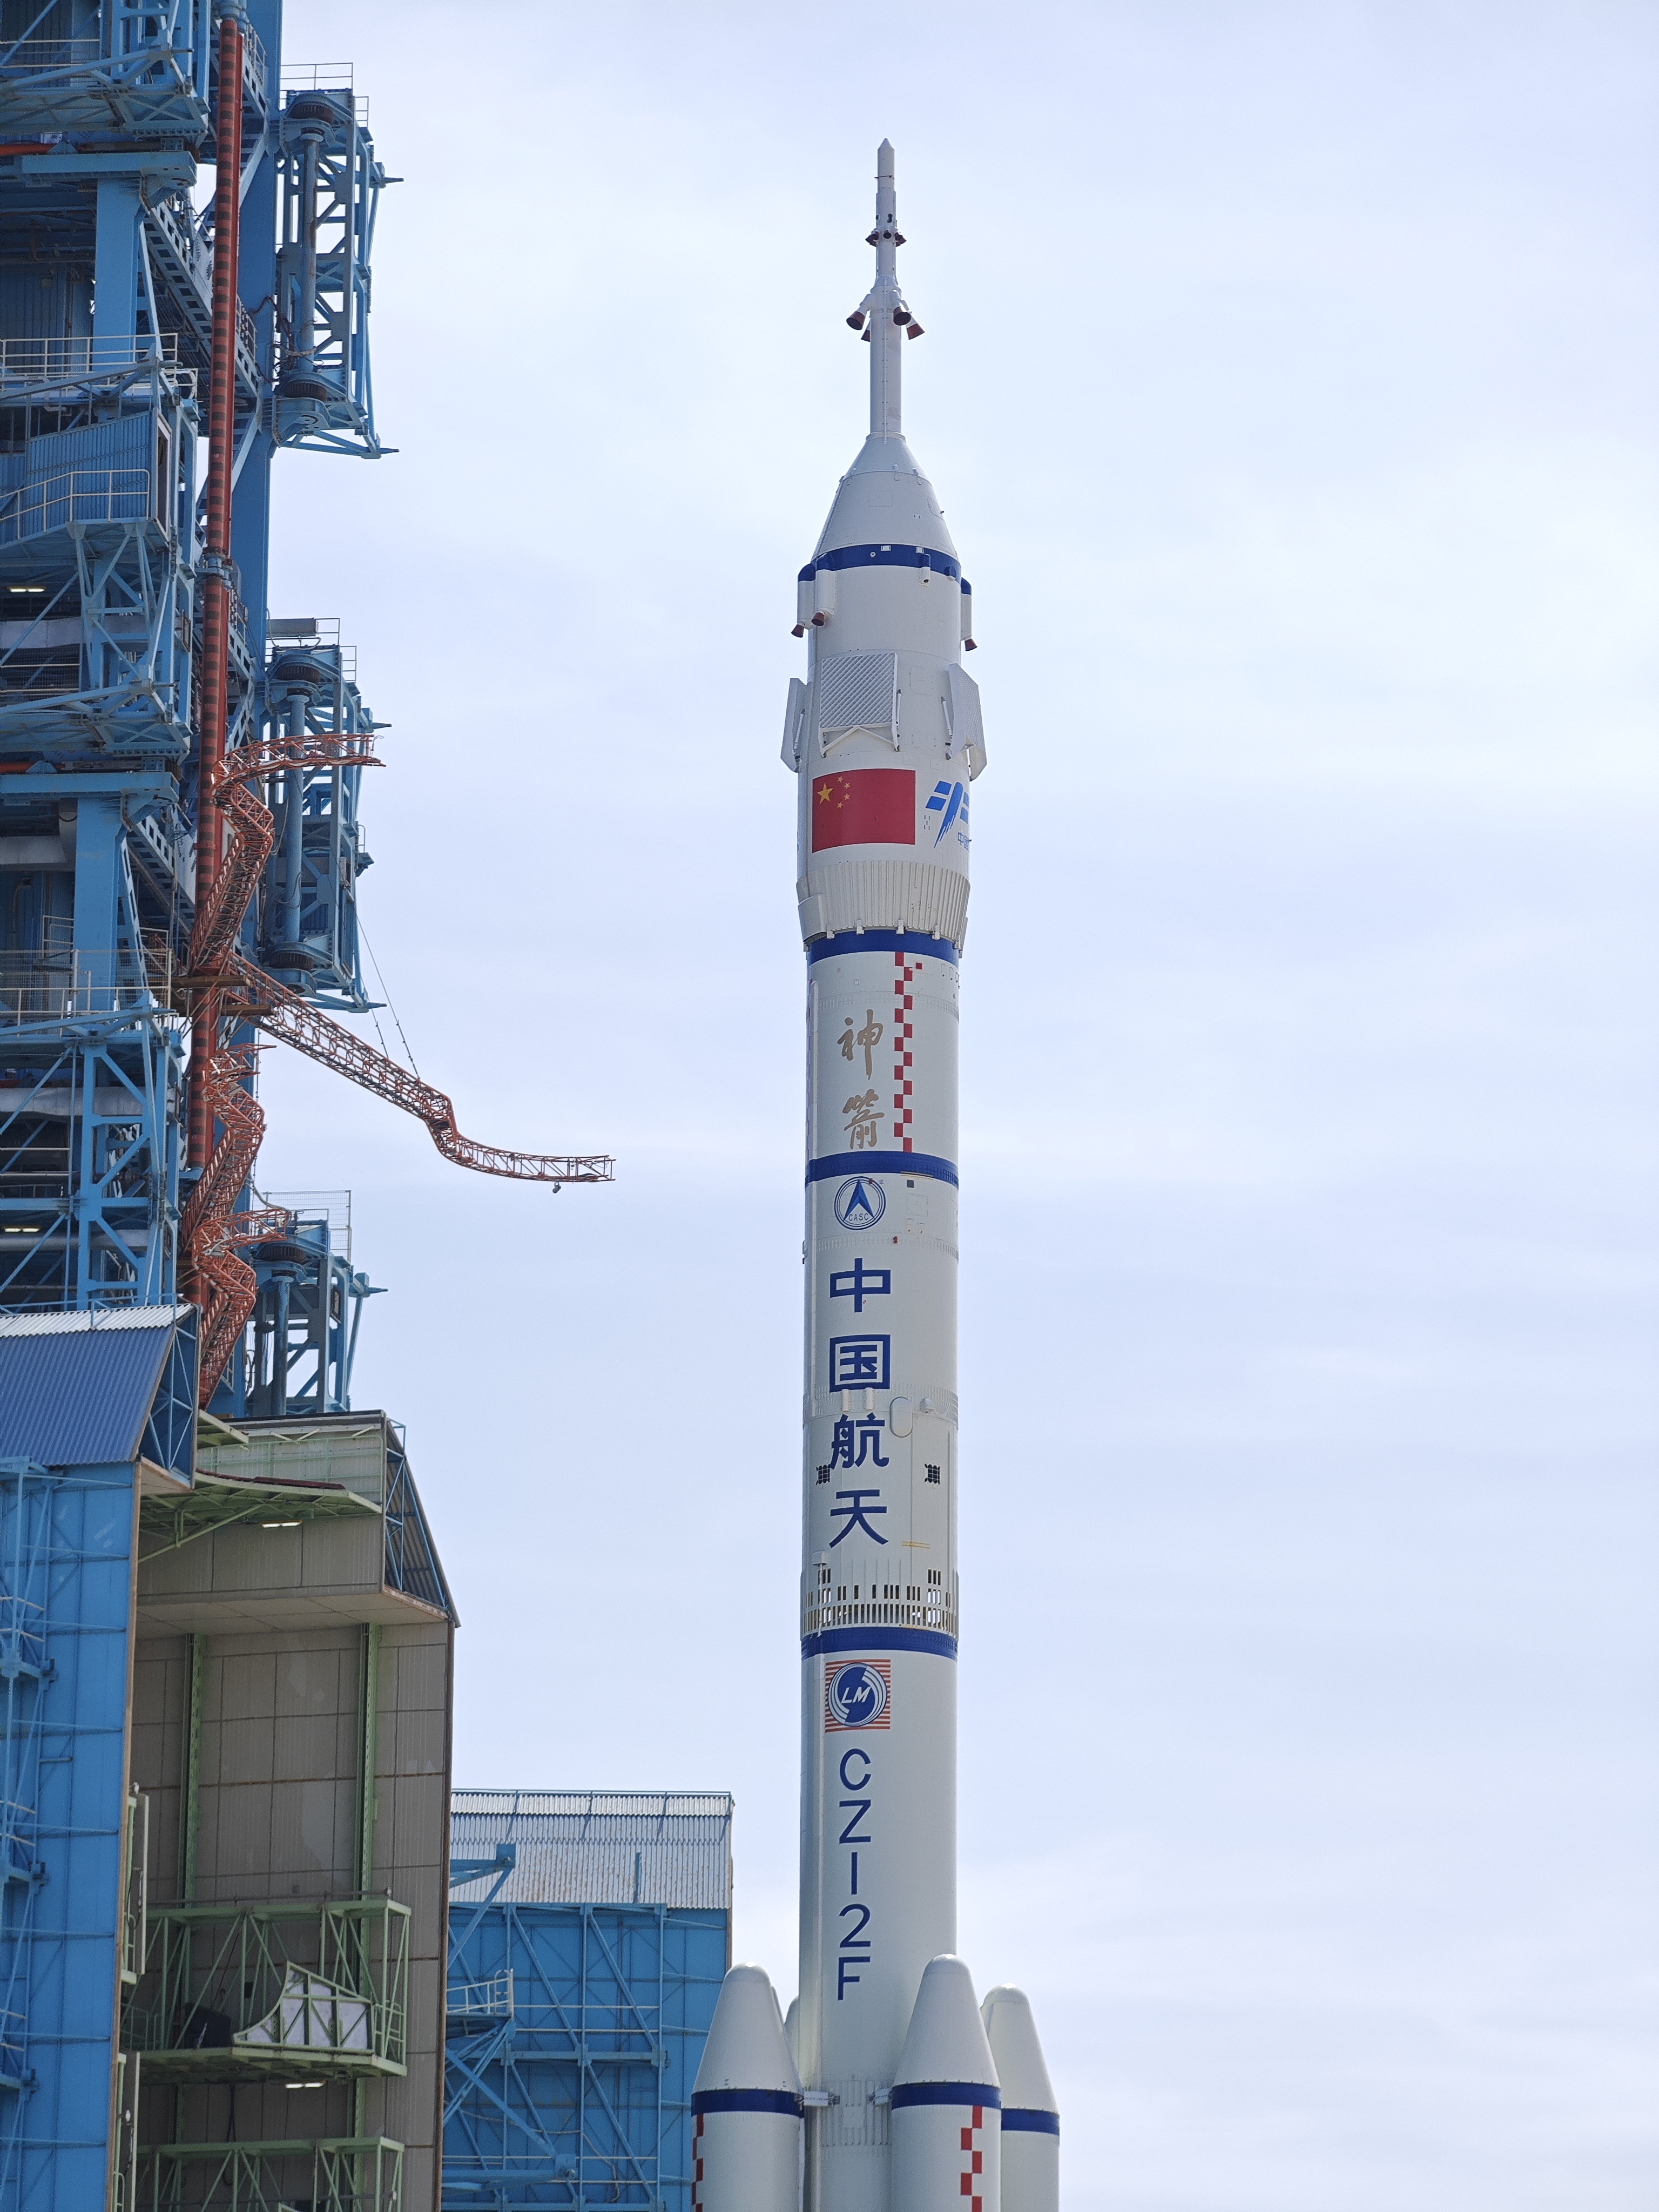 a large white rocket with four small boosters rolls to a launch pad surrounded by red flags with yellow chinese characters